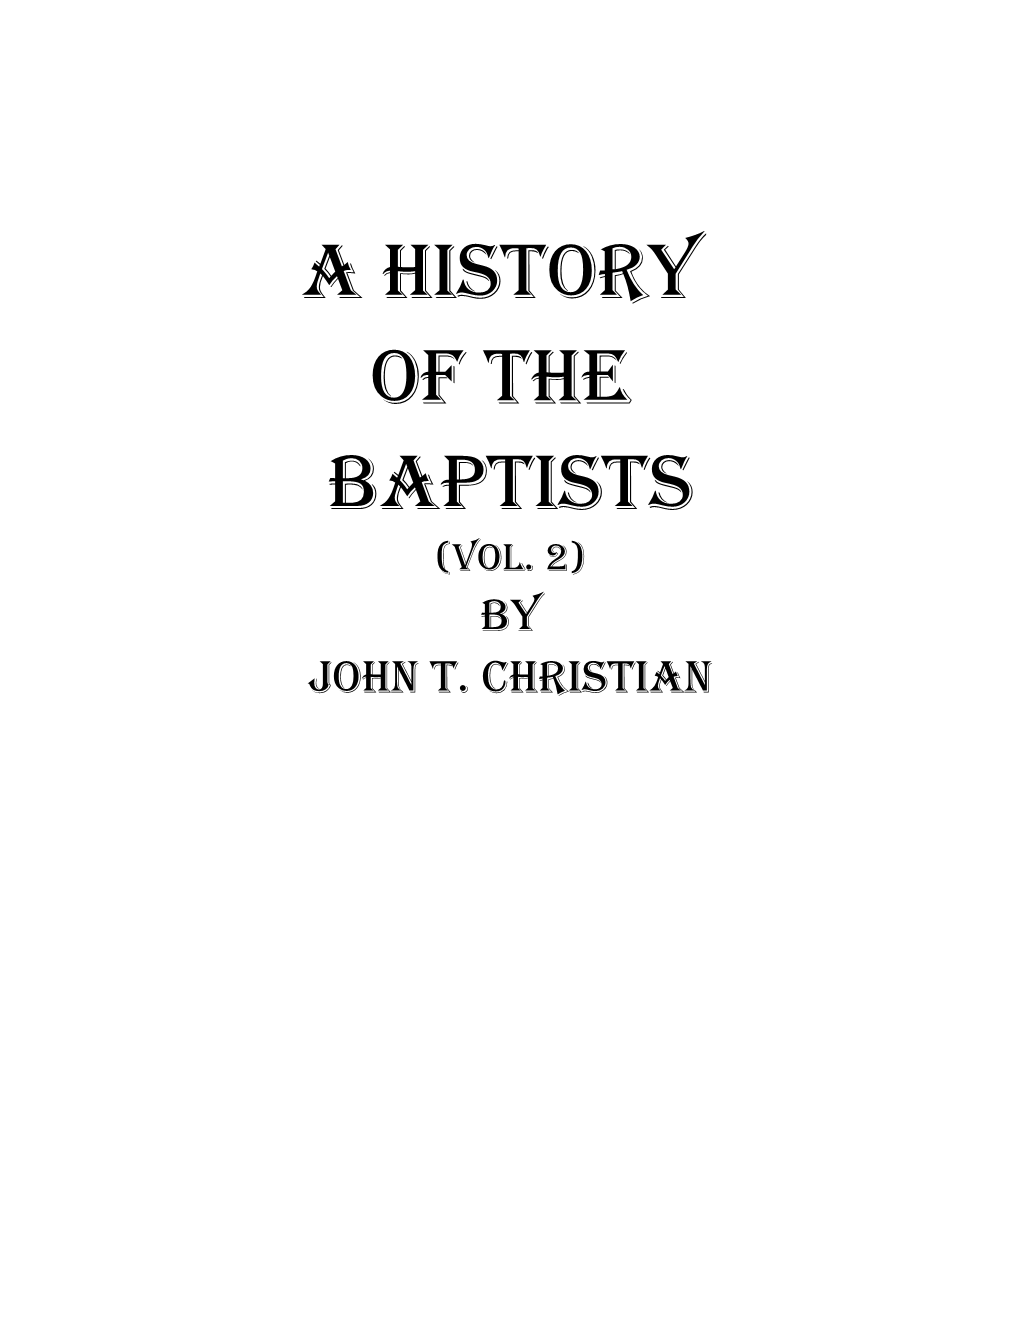 A History of the Baptists Vol 2 by John T. Christian